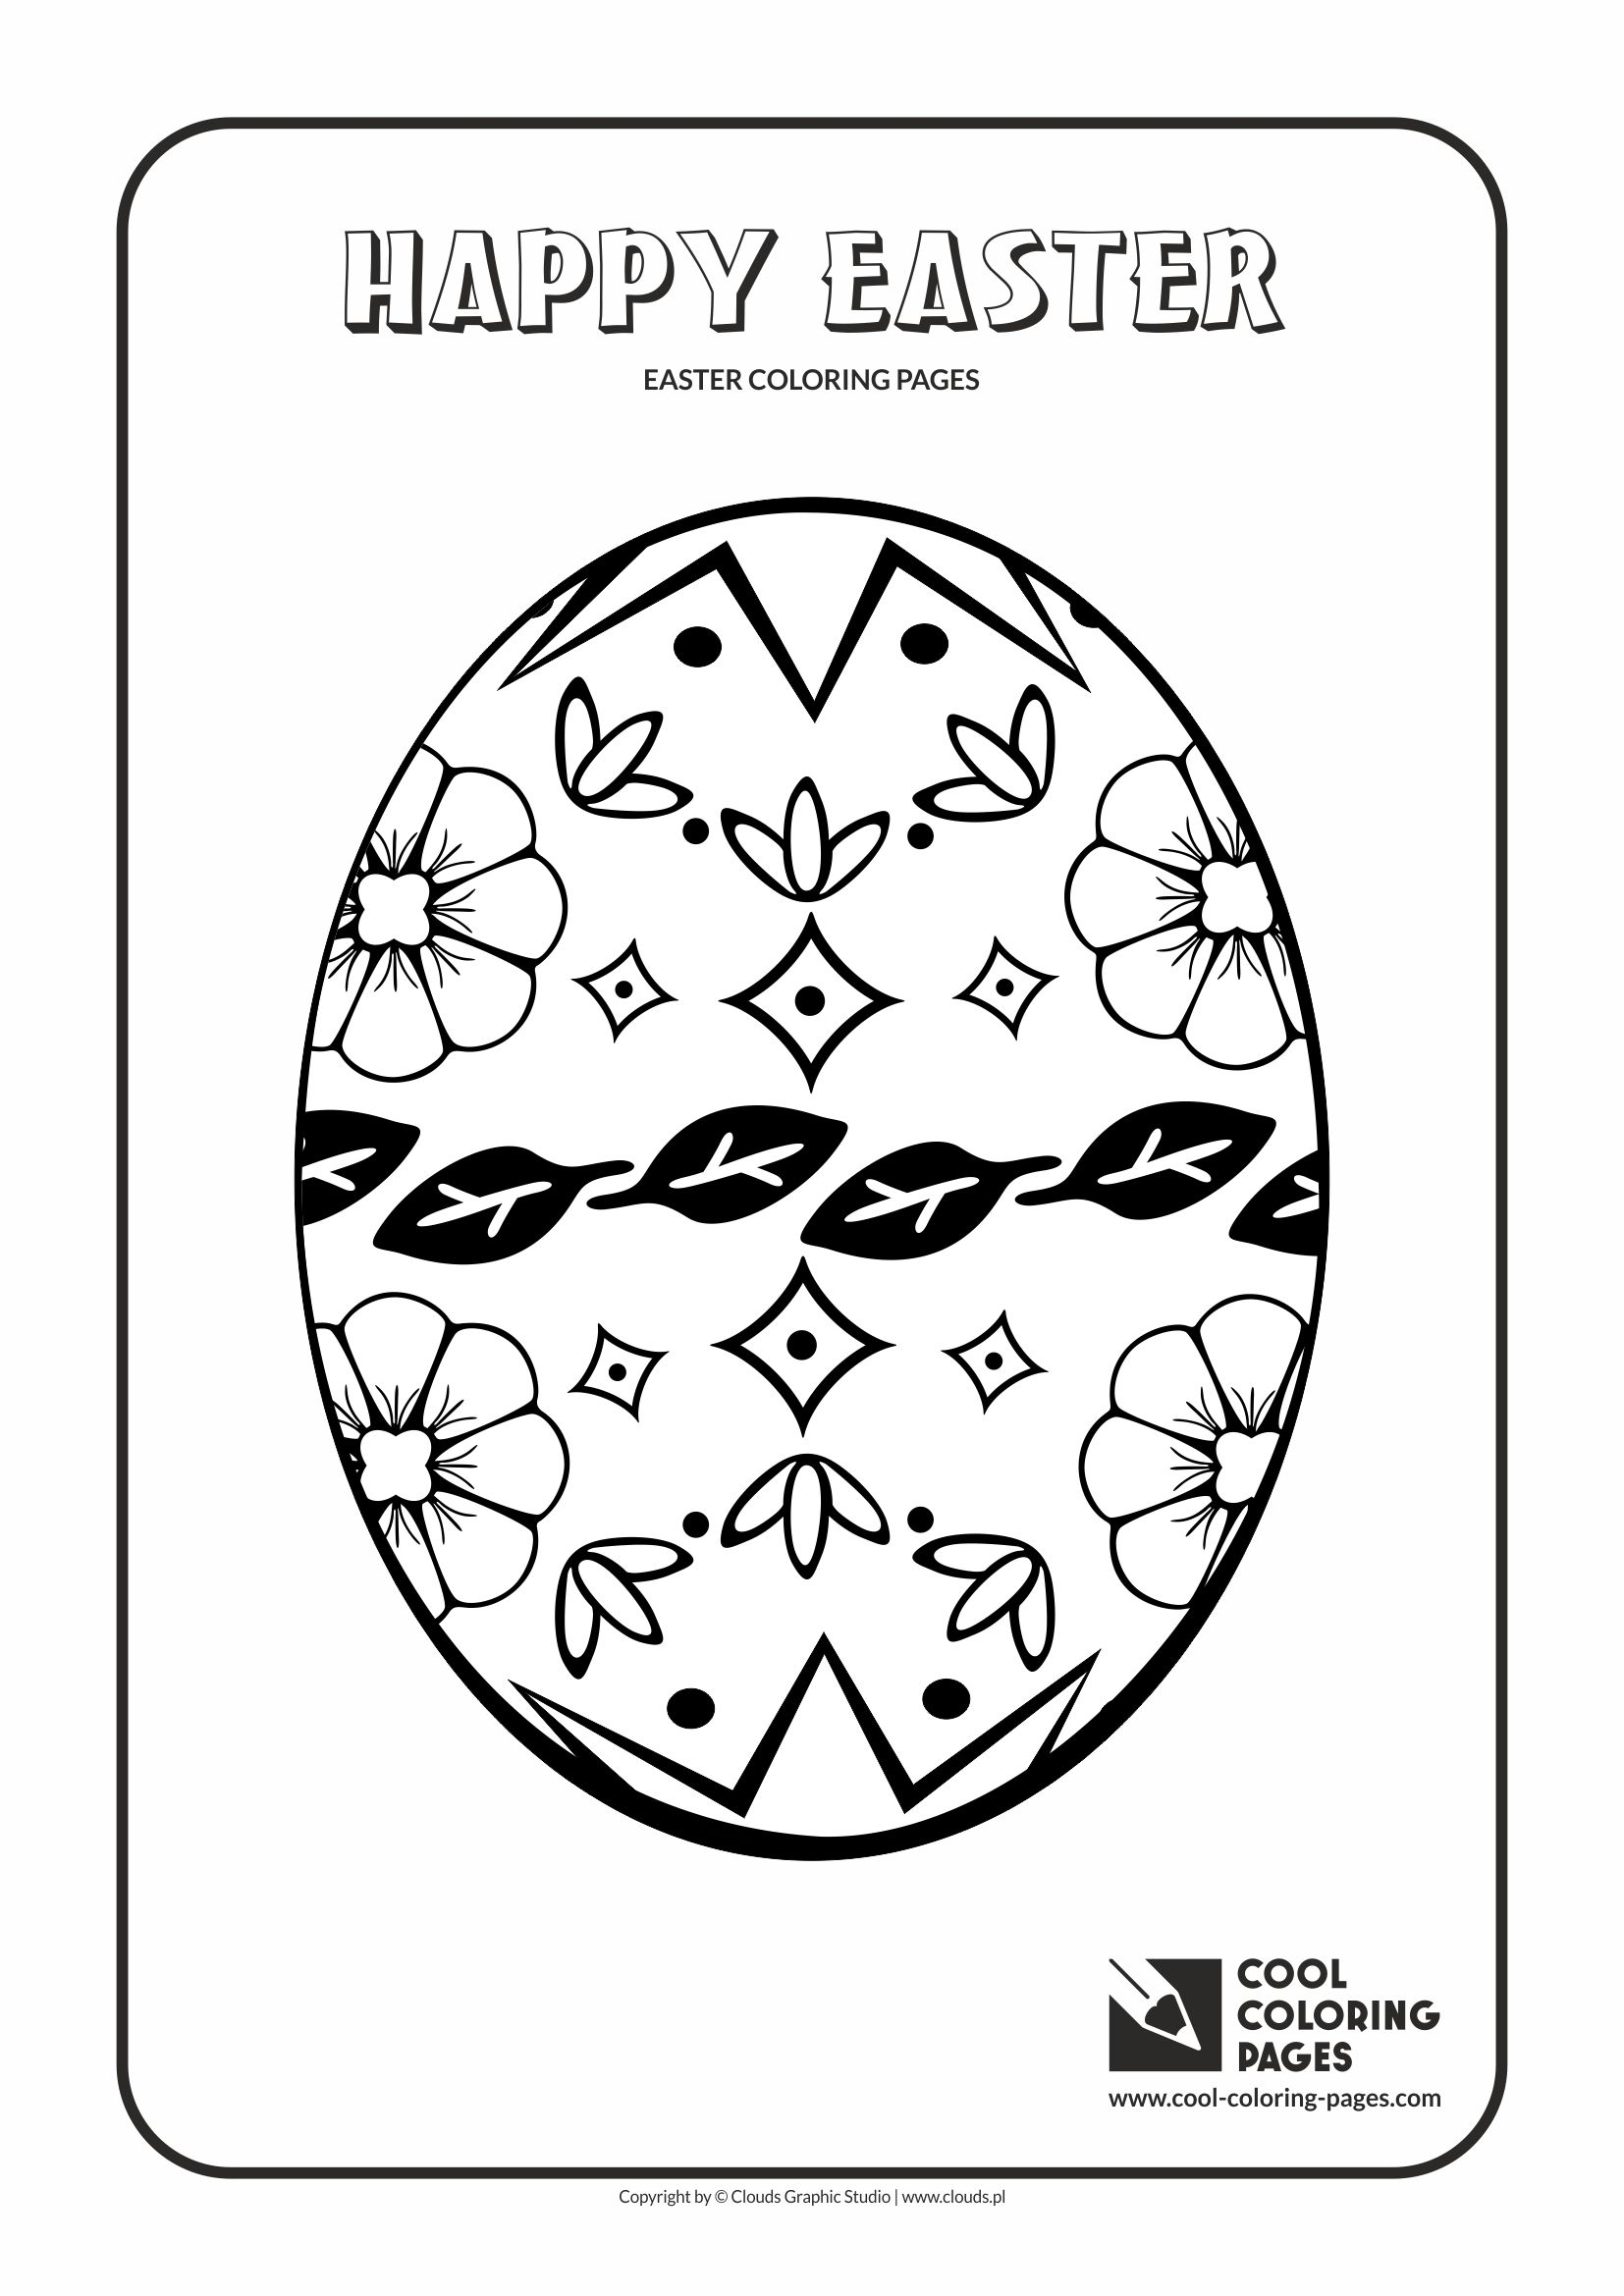 Cool Coloring Pages Easter Egg No 3 Coloring Page Cool Coloring Pages 